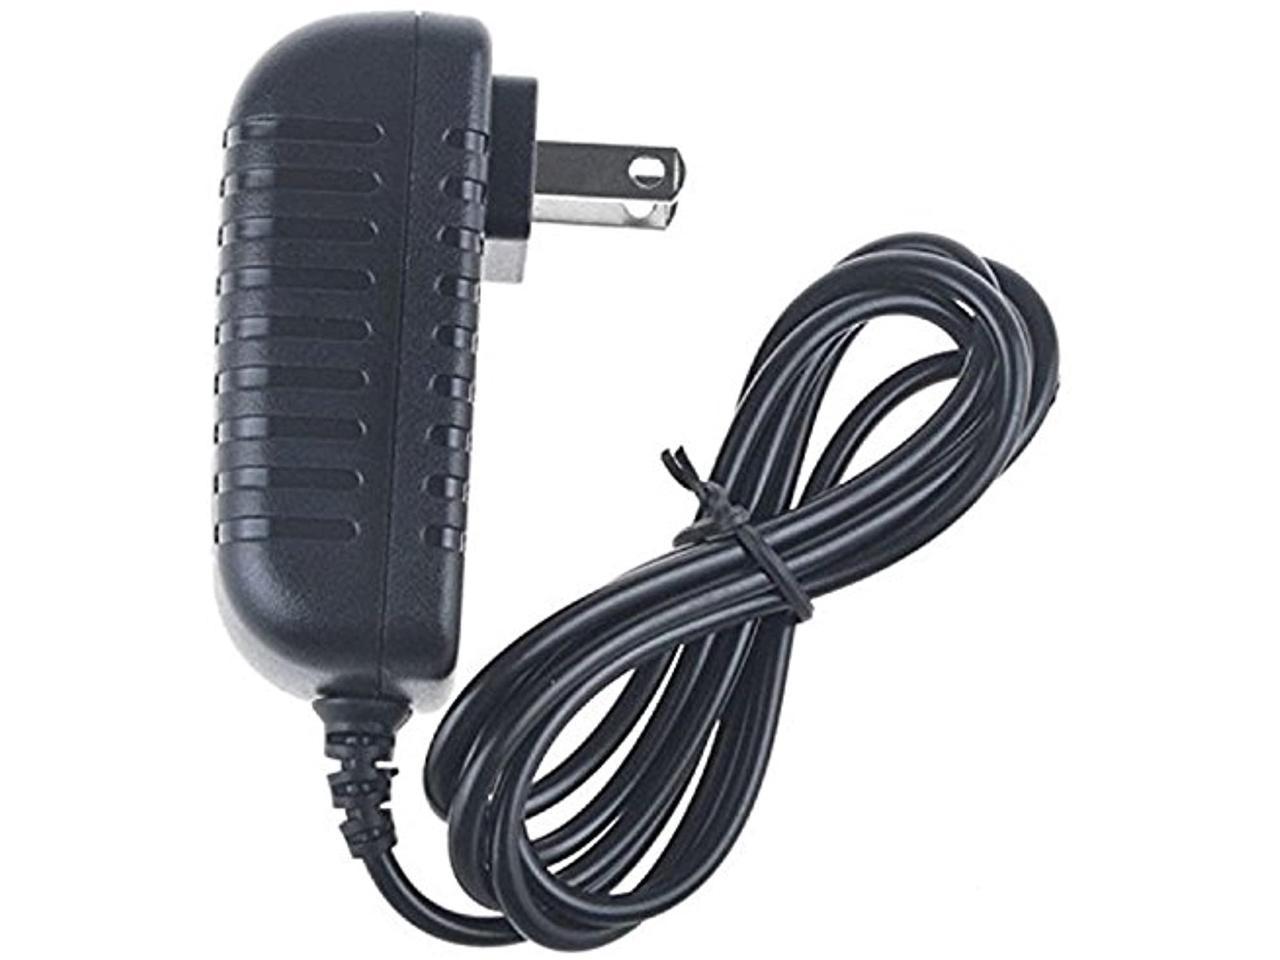 5V 2A 2.5mm AC Wall Charger for Model HN-528i Power Supply Cord Android Tablet 